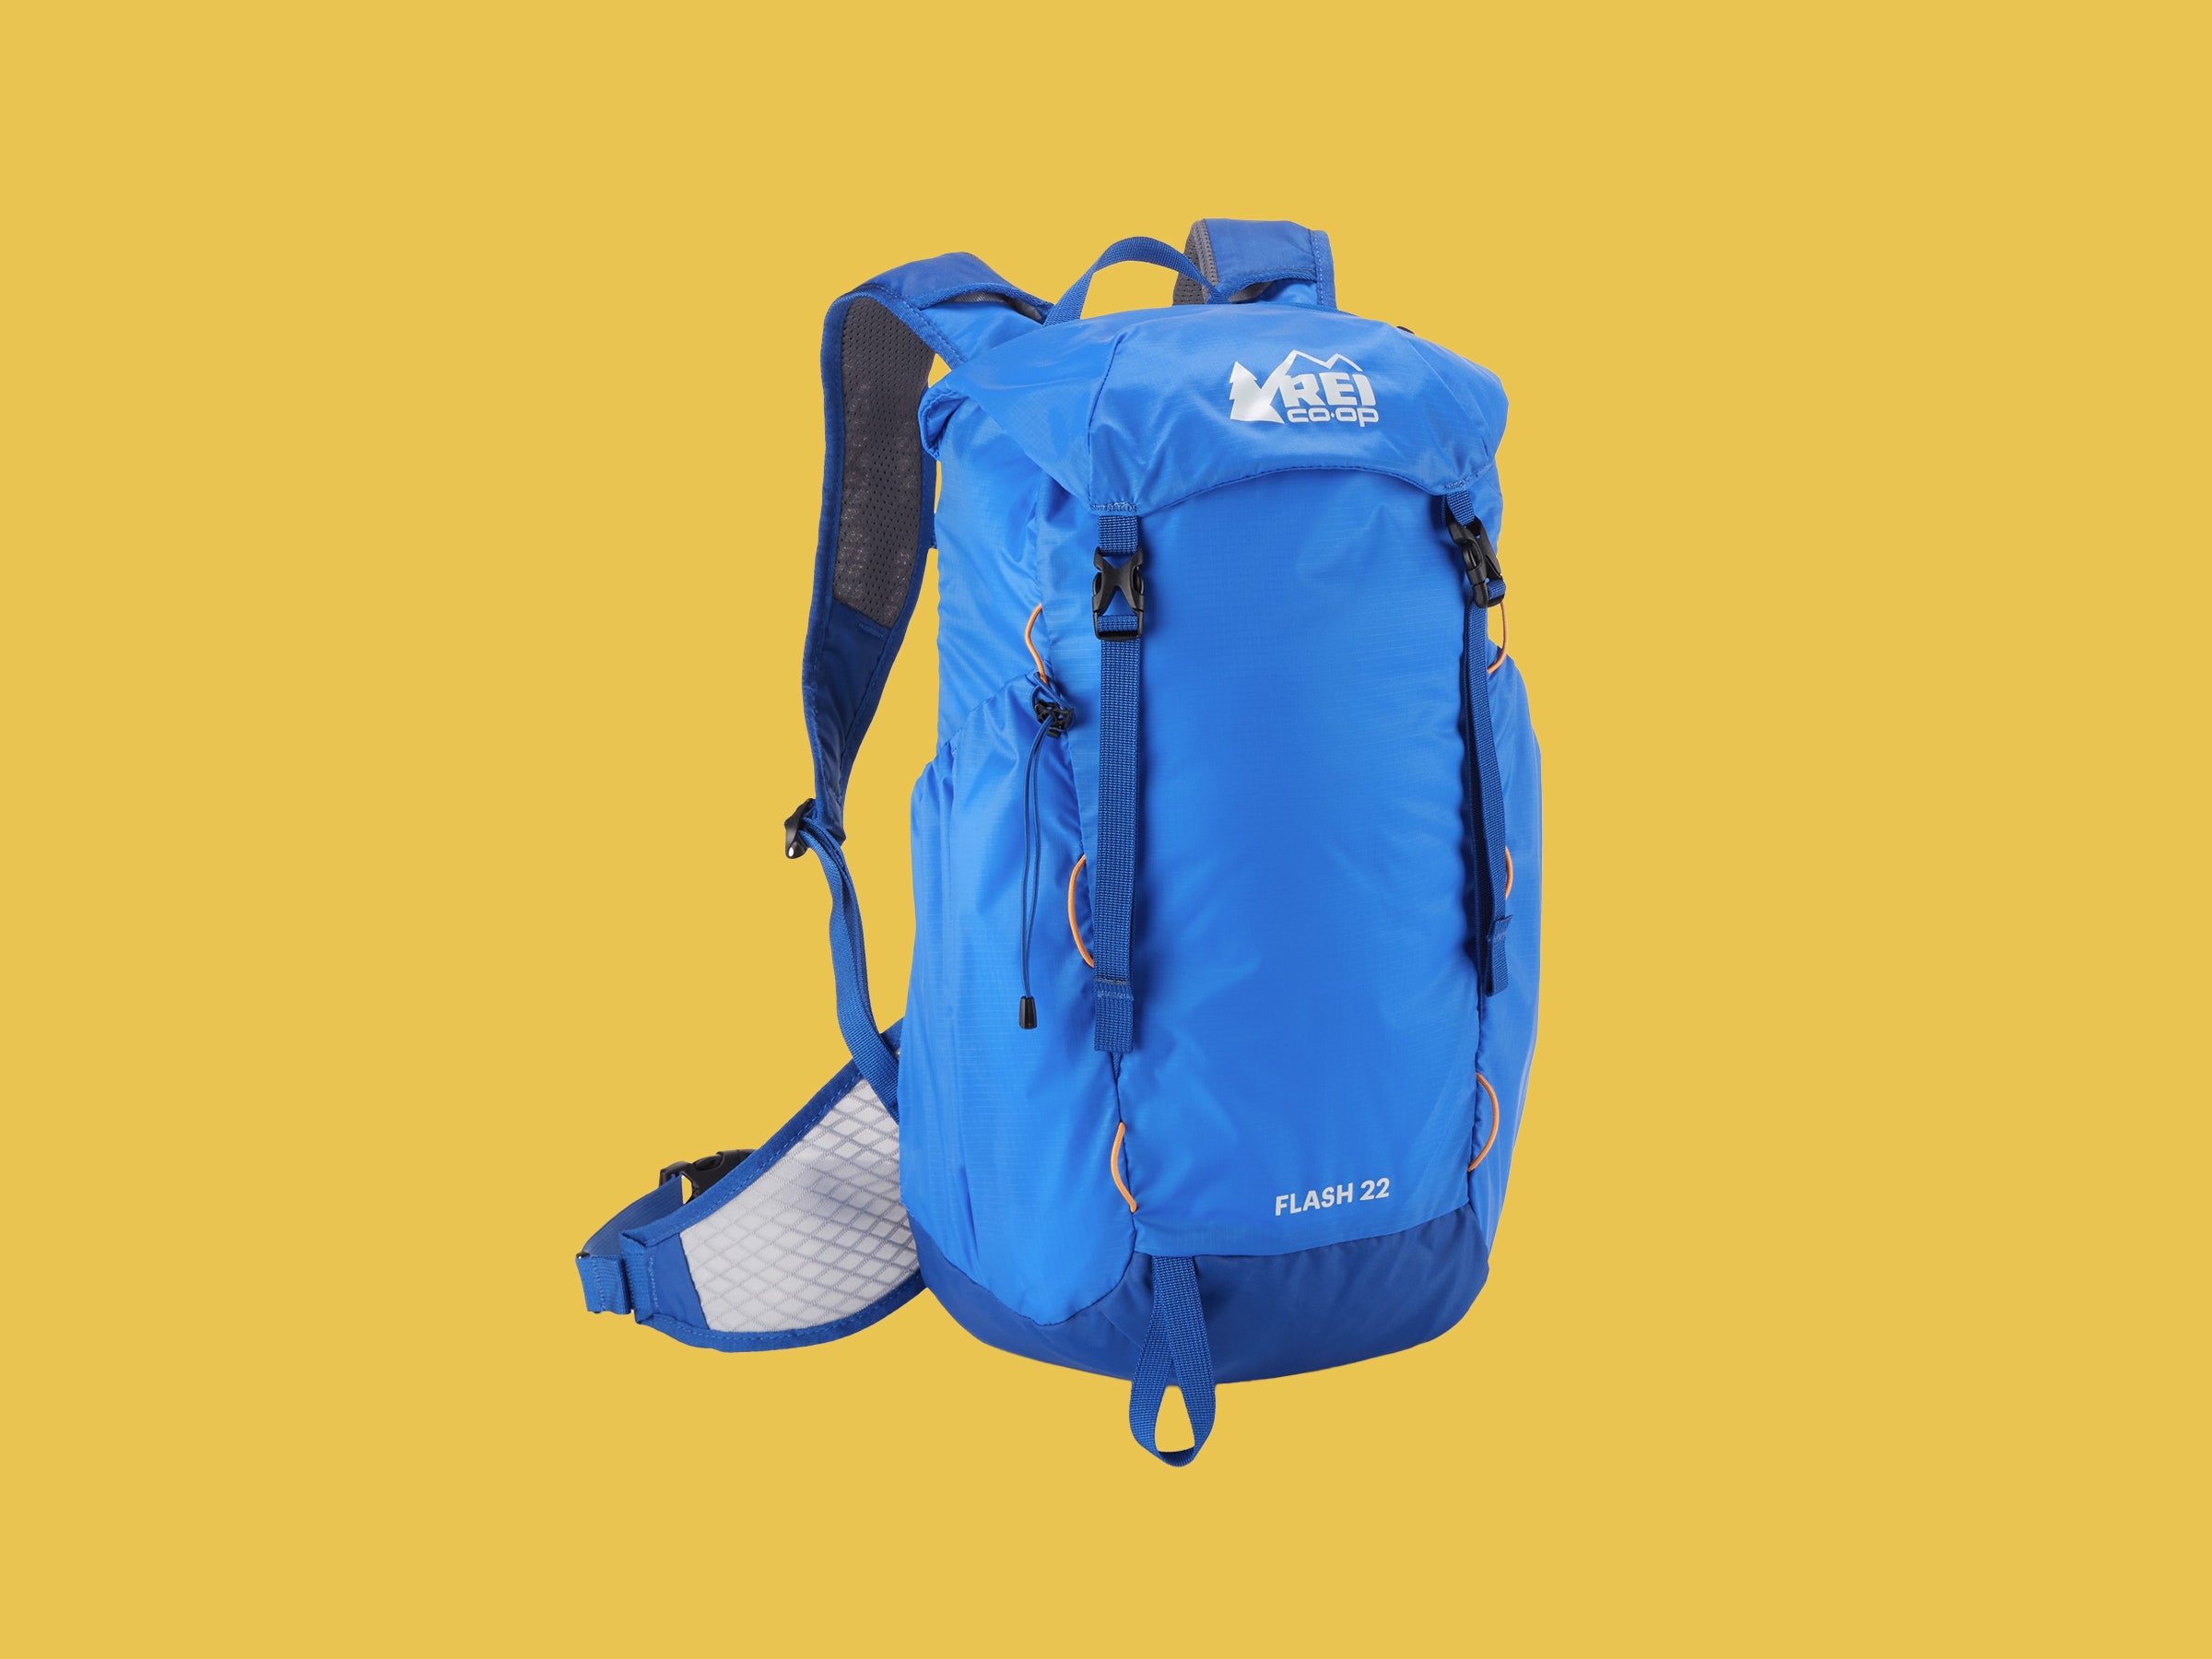 Tall blue backpack with 2 shoulder straps and a waist strap. Yellow background.